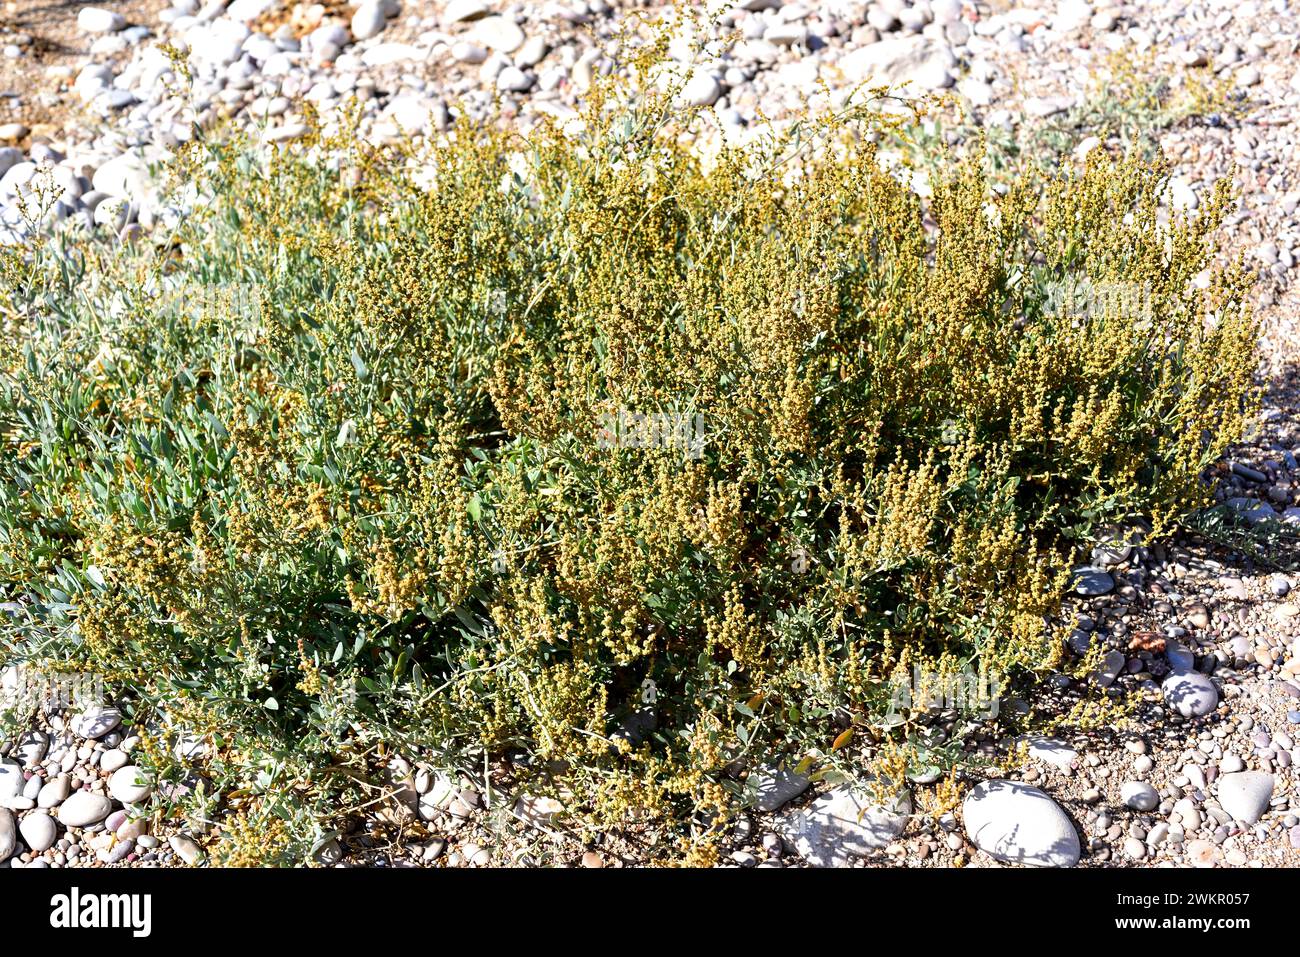 Sea purslane (Halimione portulacoides or Atriplex portulacoides) is an halophyte perennial plant native to coasts and salt marshes to Eurasia. This ph Stock Photo